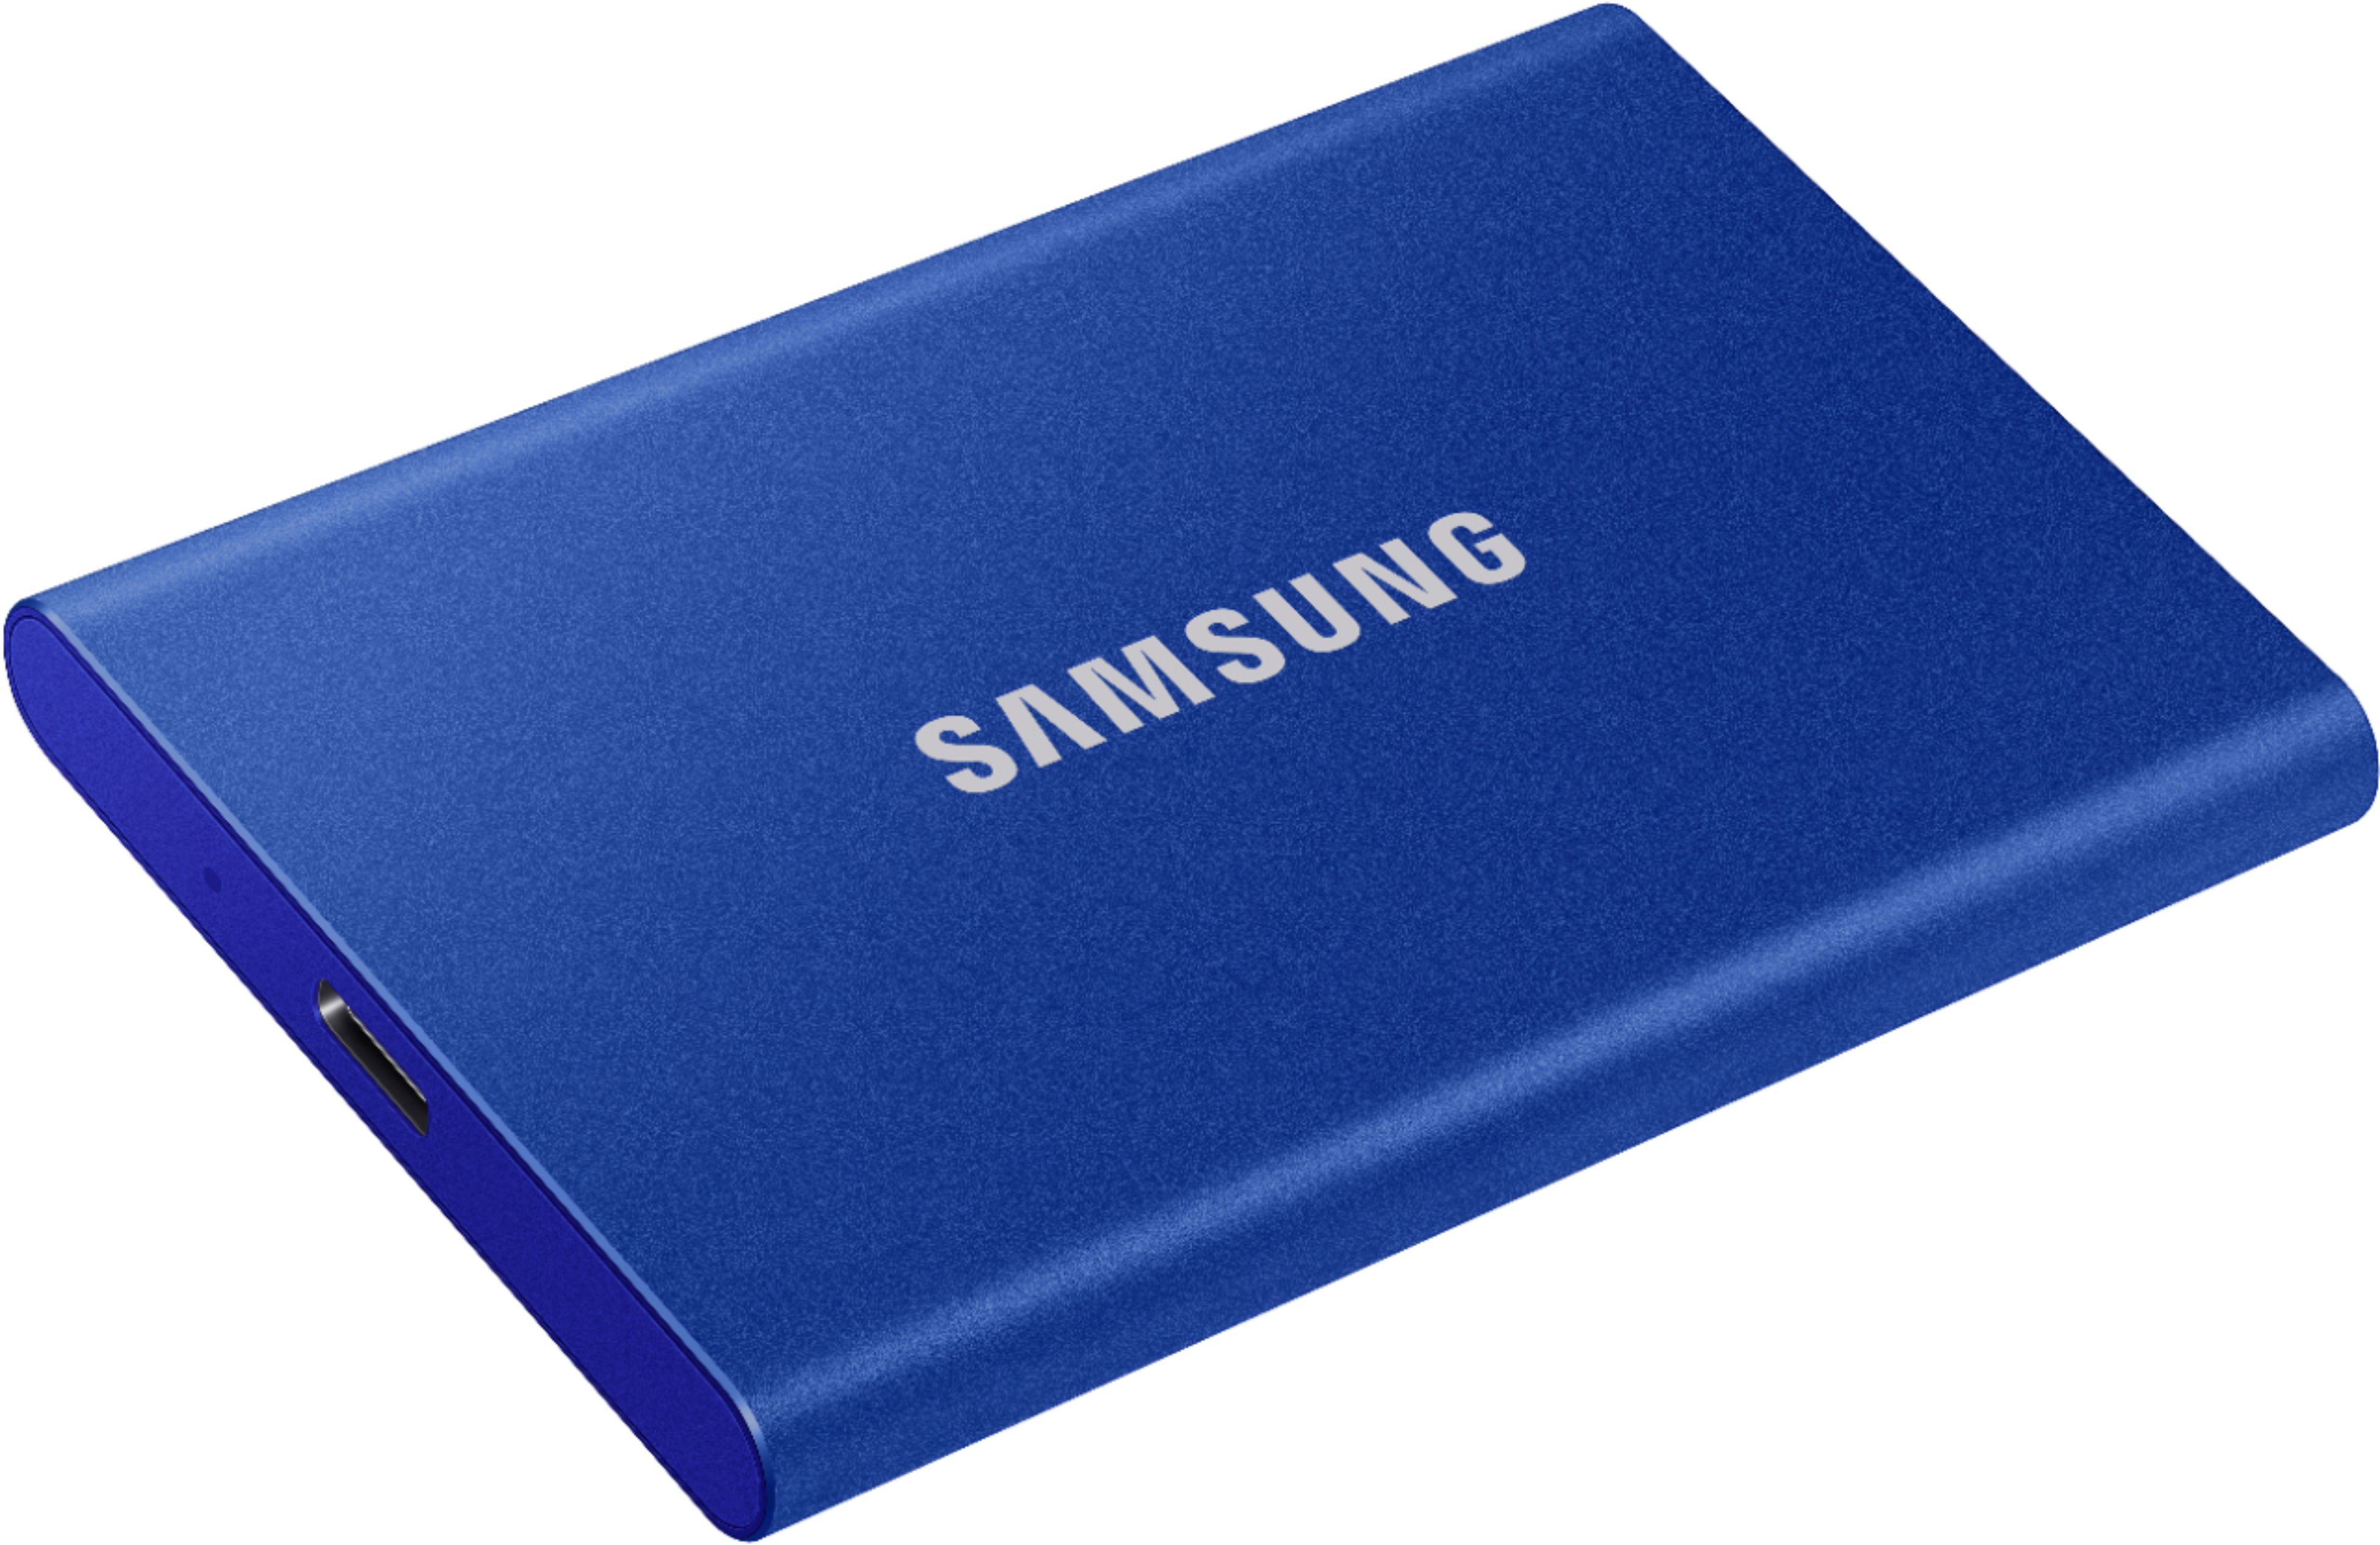 SAMSUNG SSD T7 Portable External Solid State Drive 2TB, USB 3.2 Gen 2,  Reliable Storage for Gaming, Students, Professionals, MU-PC2T0H/AM, Blue